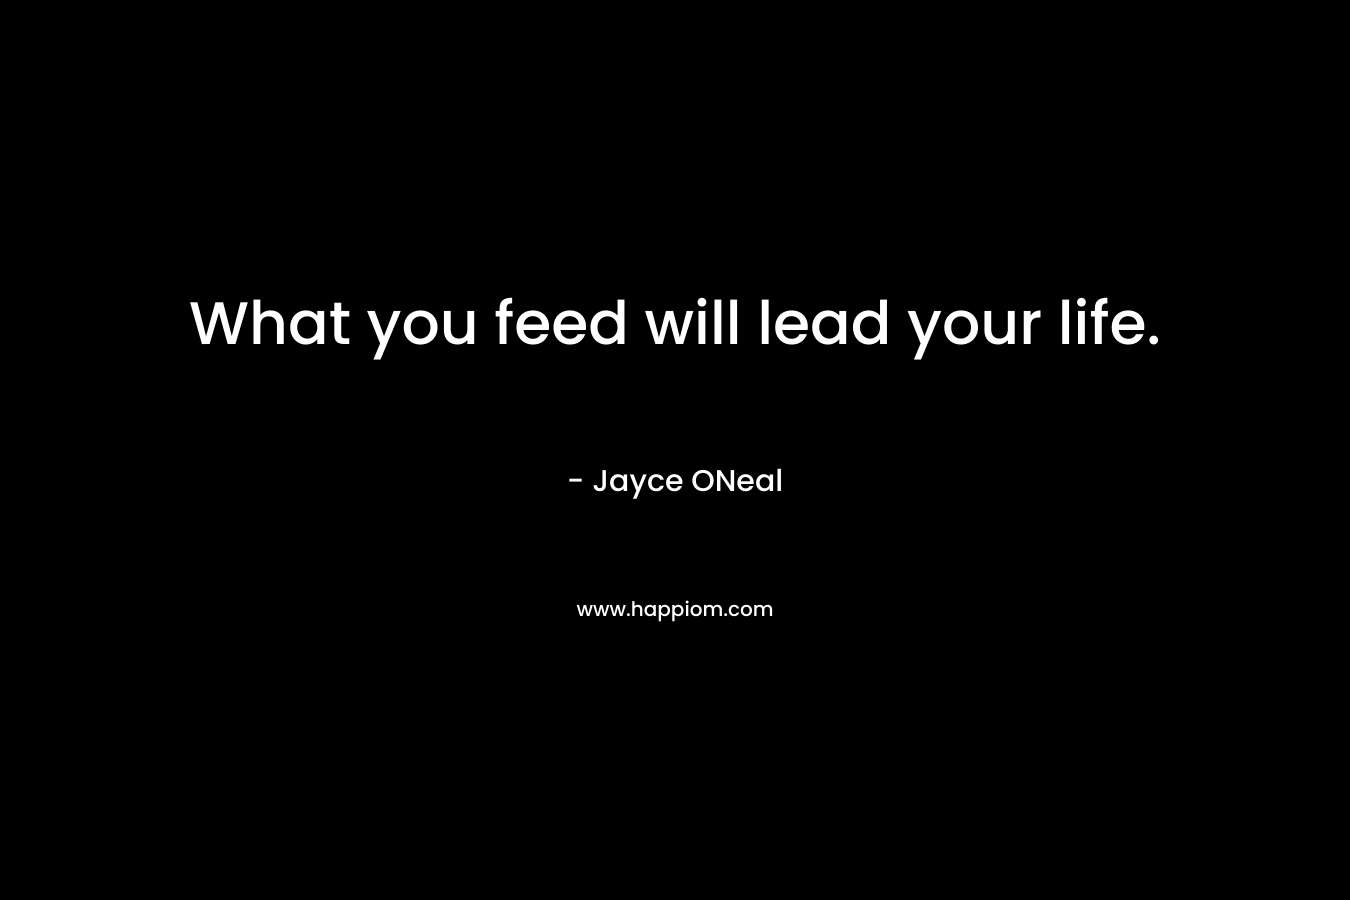 What you feed will lead your life. – Jayce ONeal